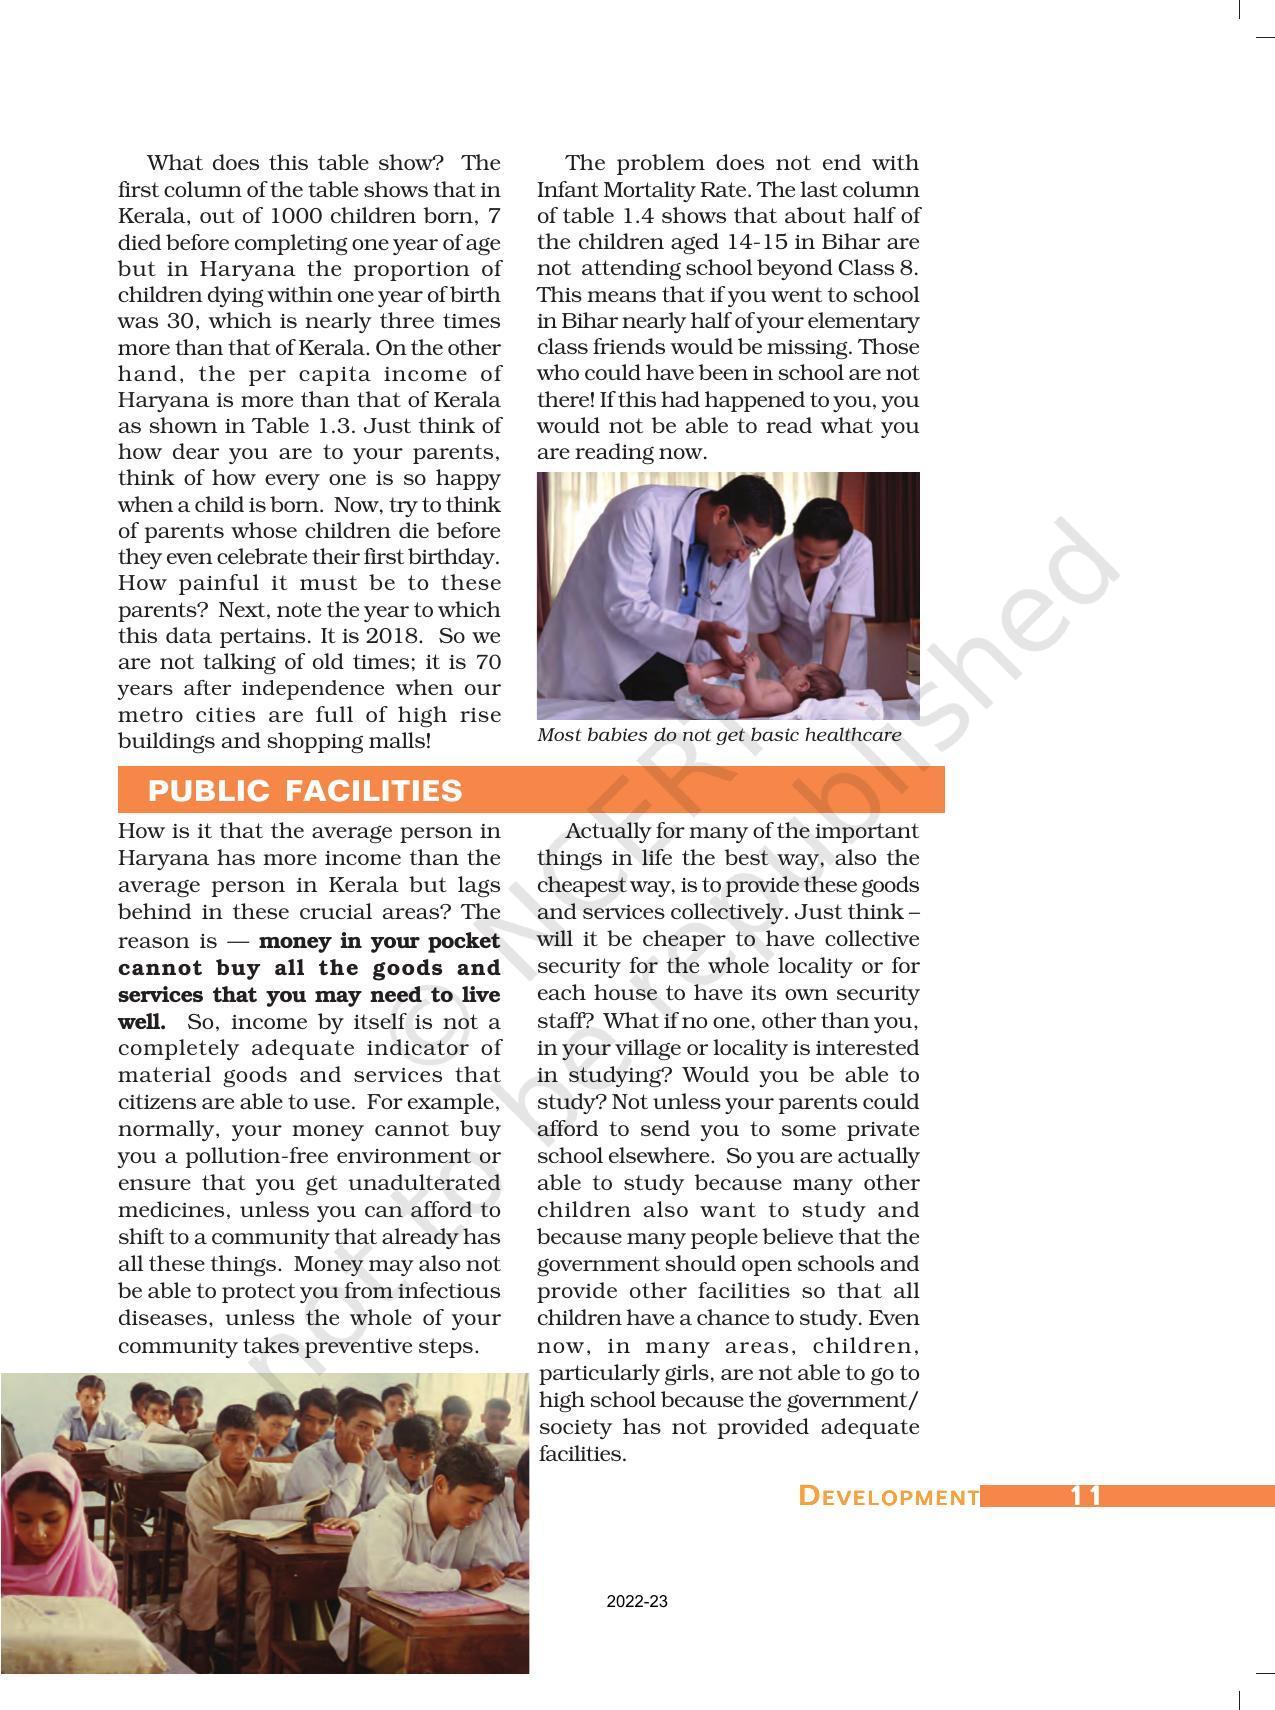 NCERT Book for Class 10 Economics Chapter 1 Development - Page 10